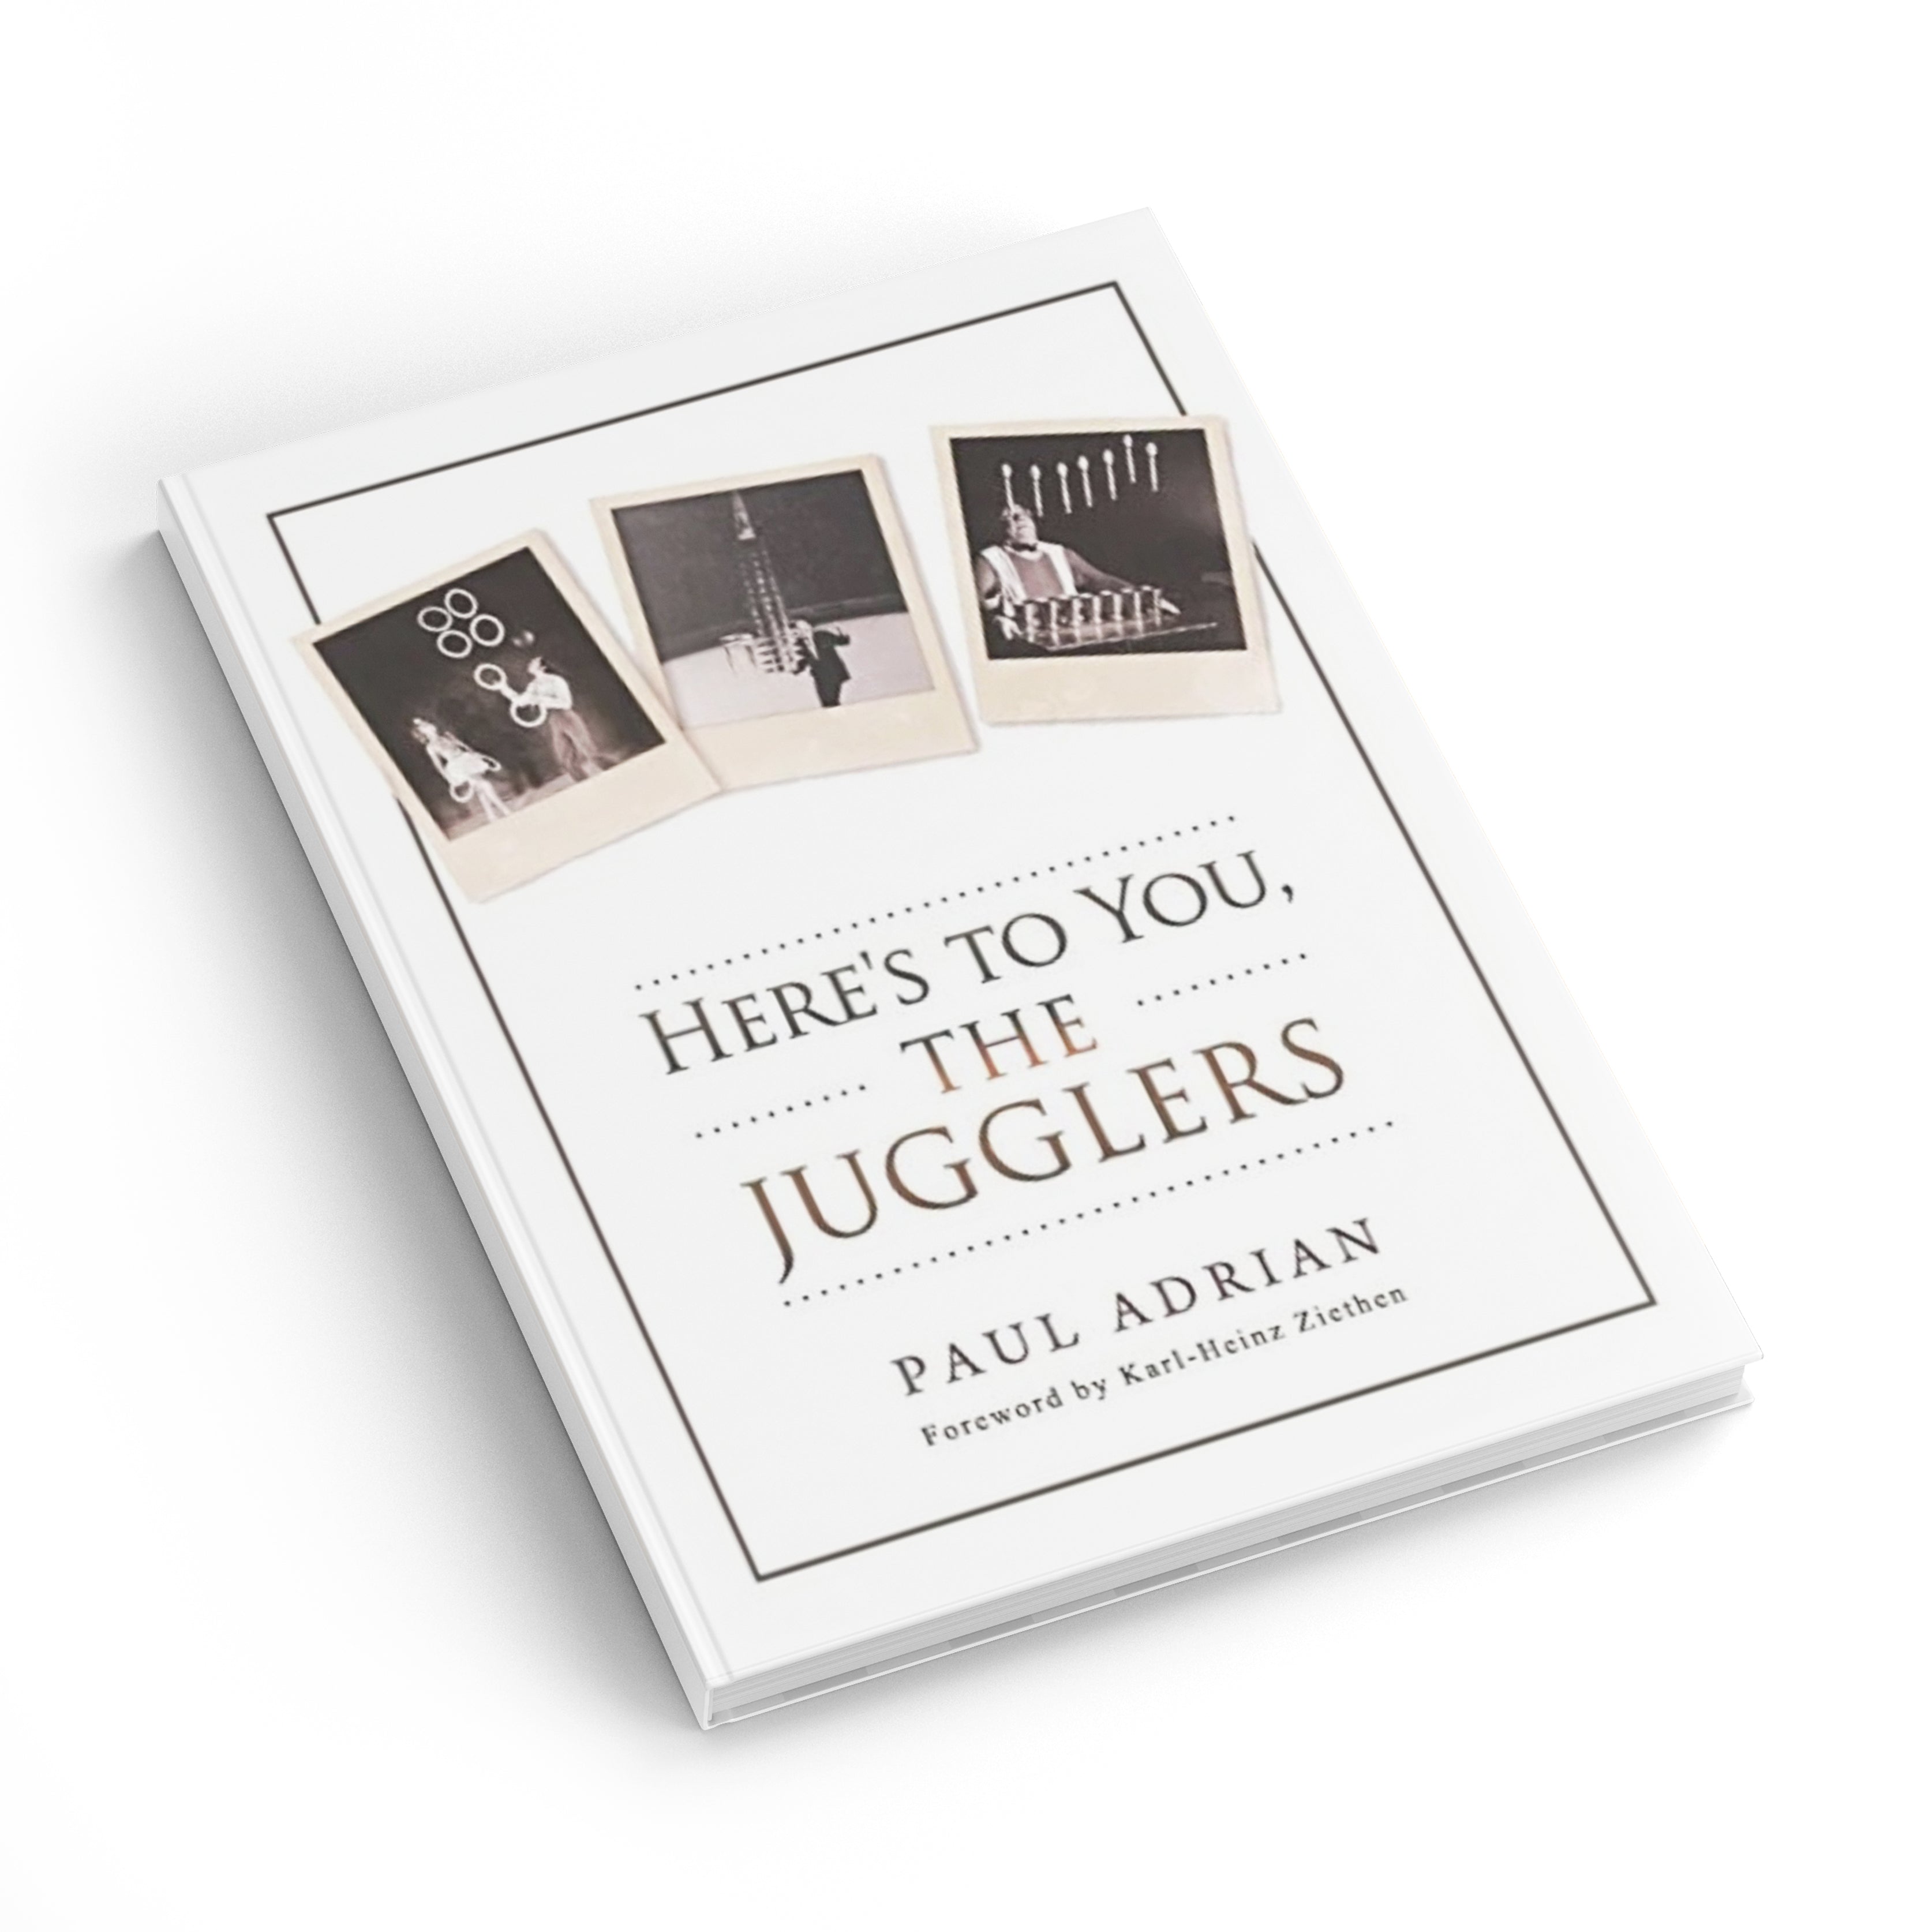 Here's to You, The Jugglers by: Paul Adrian